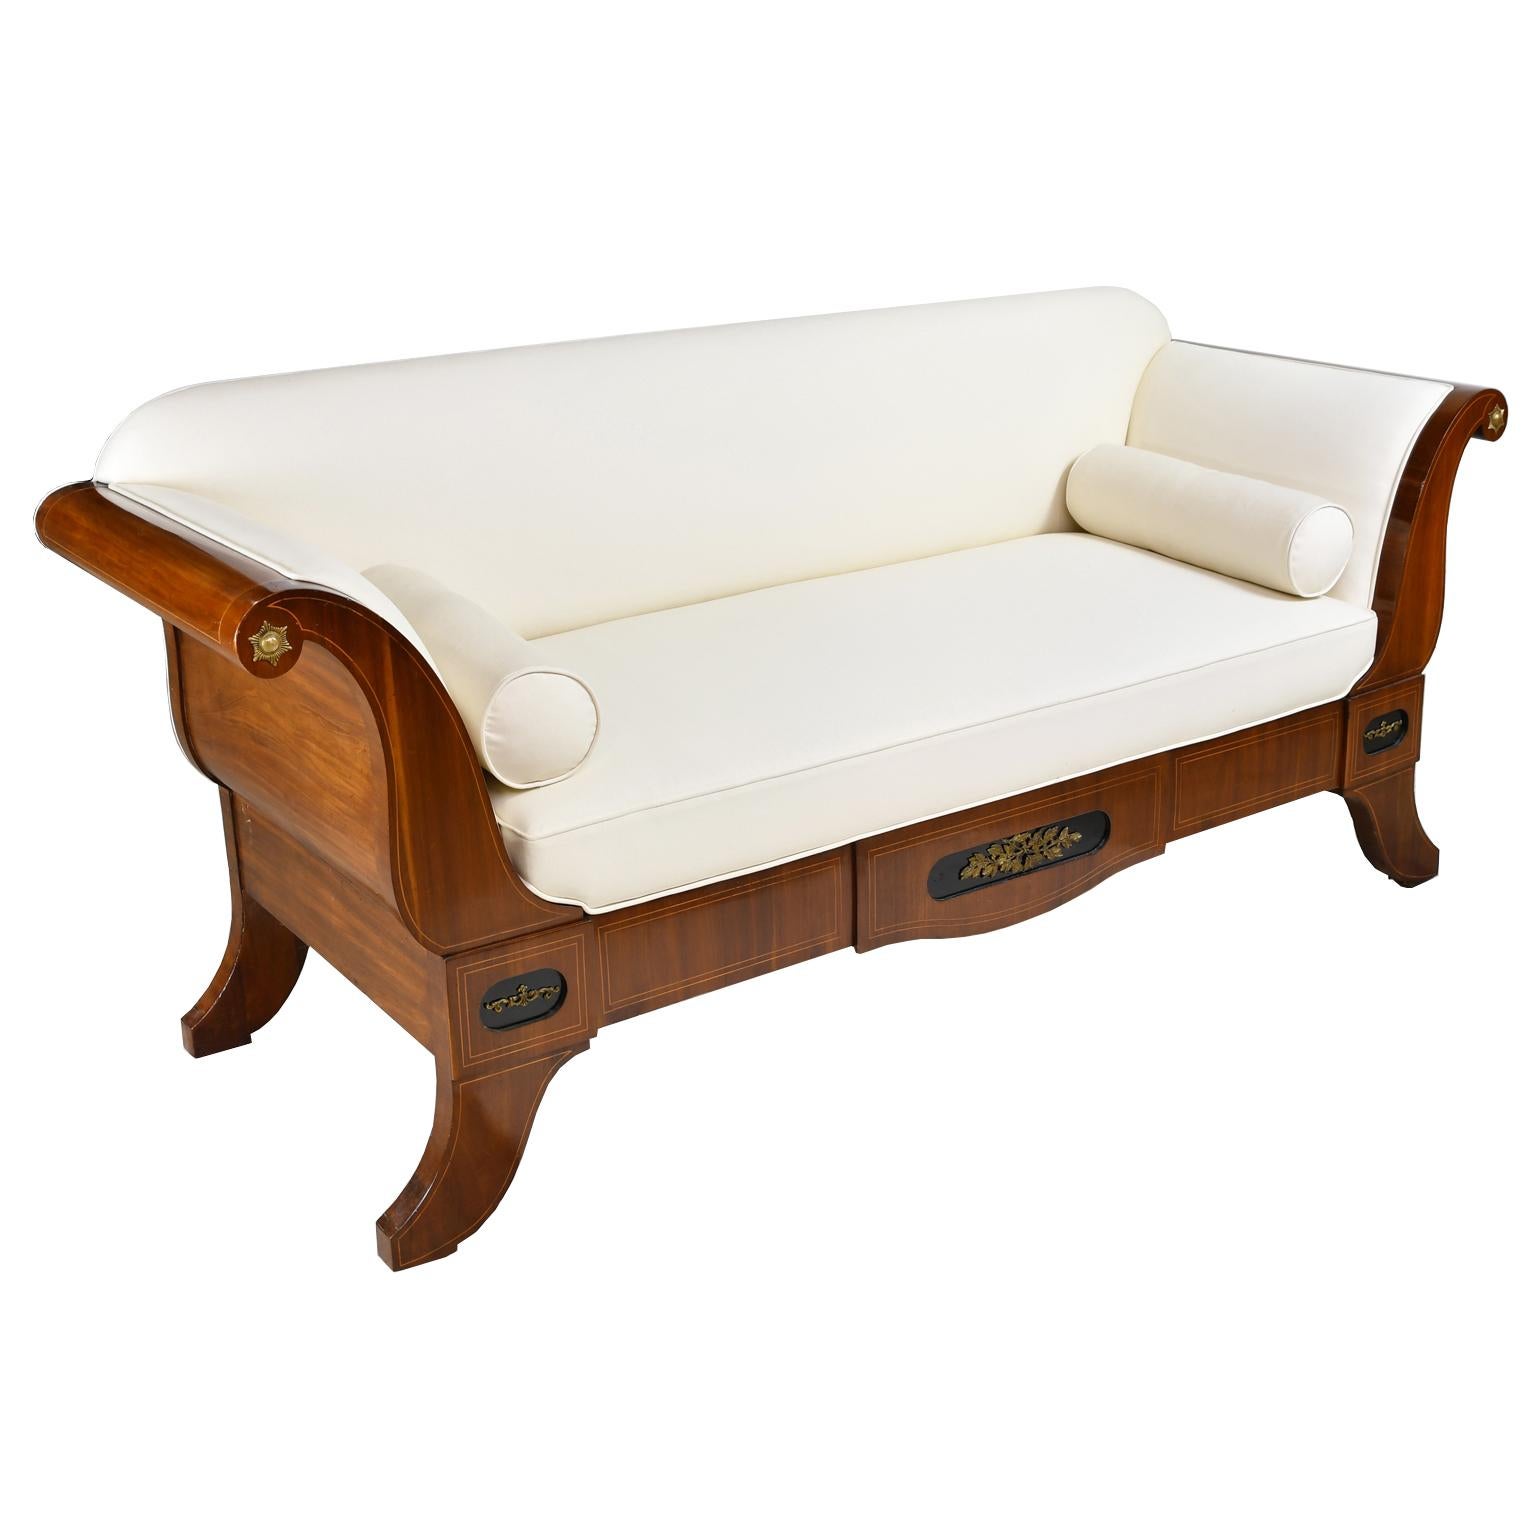 Scandinavian Empire Sofa in Mahogany with Ormolu and Upholstery, circa 1815 For Sale 1